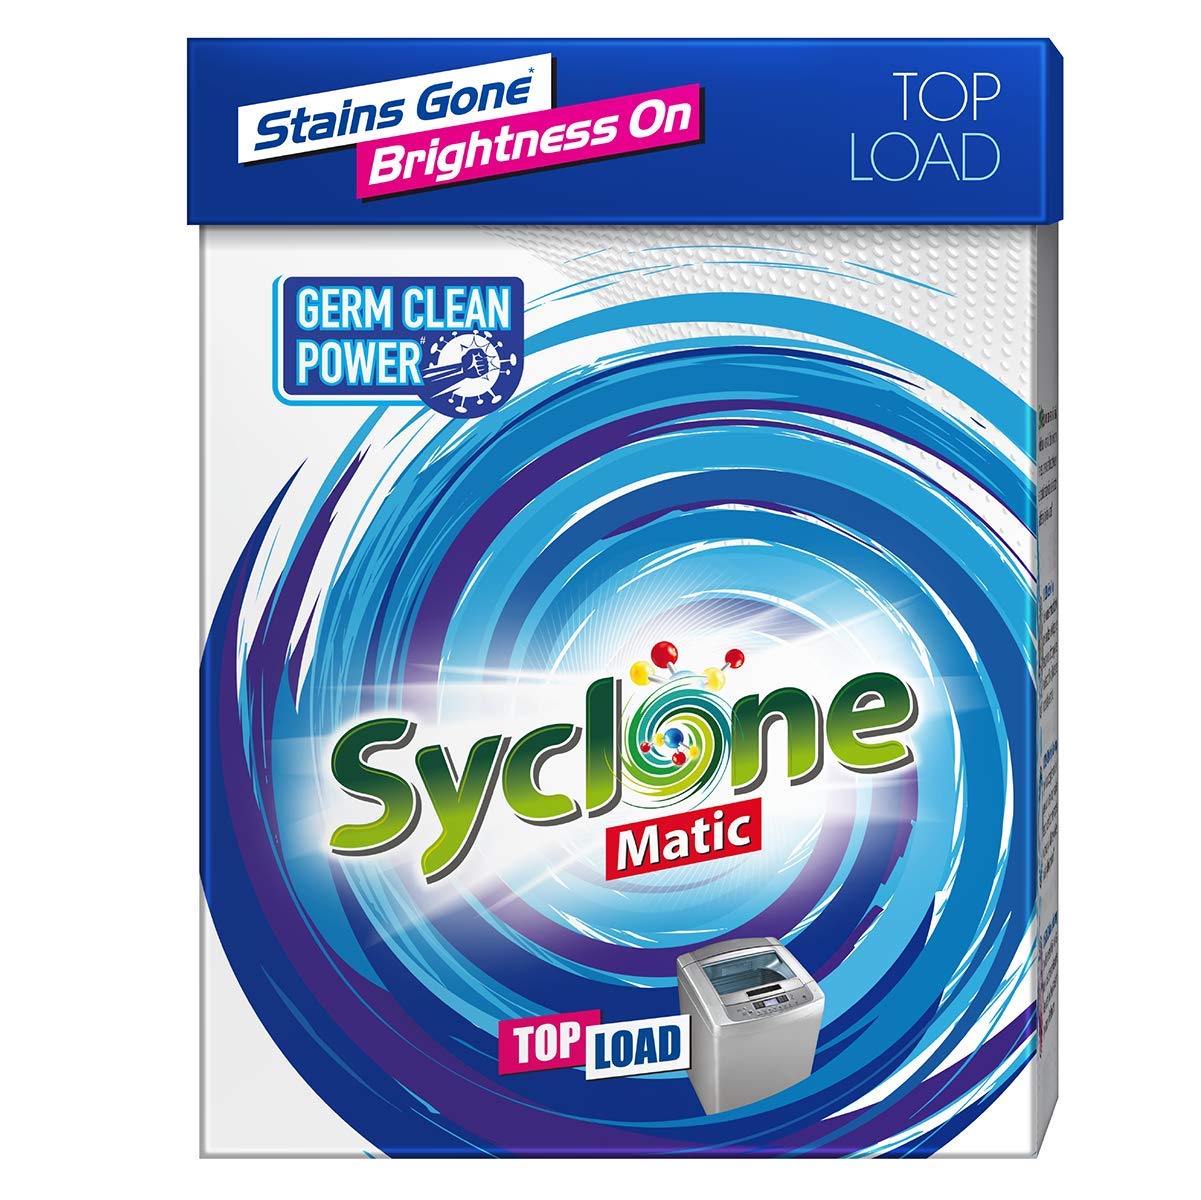 Syclone Matic Top Load Detergent Powder